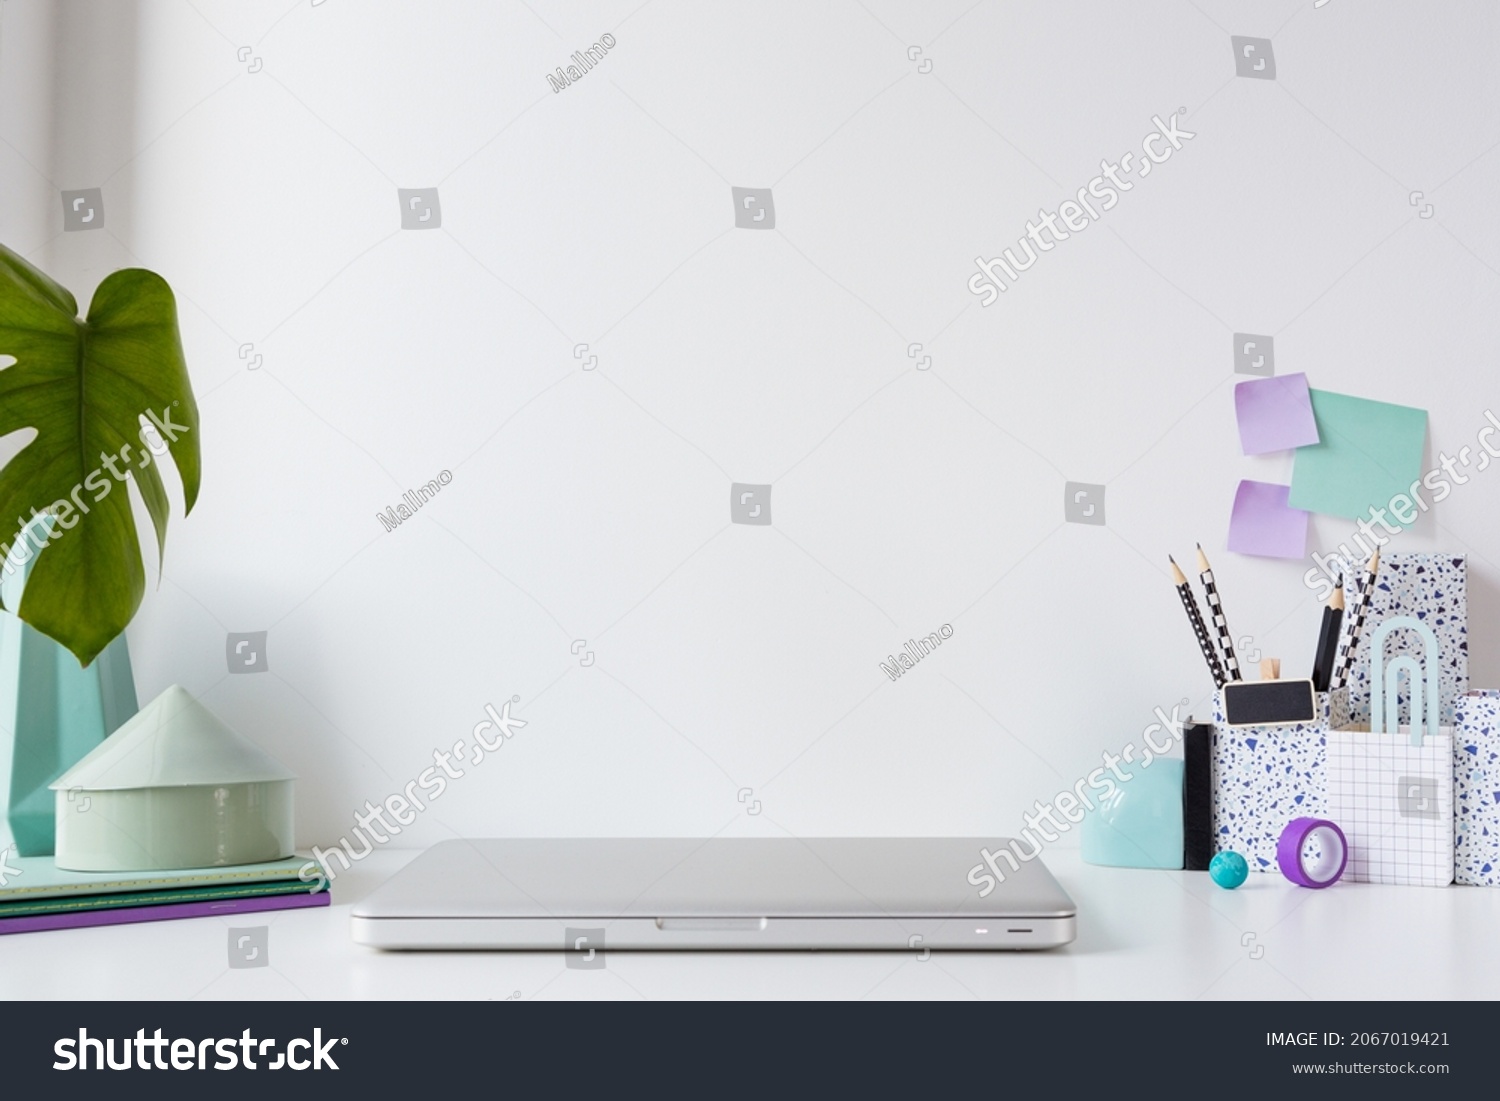 Home office. Table with closed laptop, books and supplies in purple colour. Stylish creative mock up with wall copy space. #2067019421